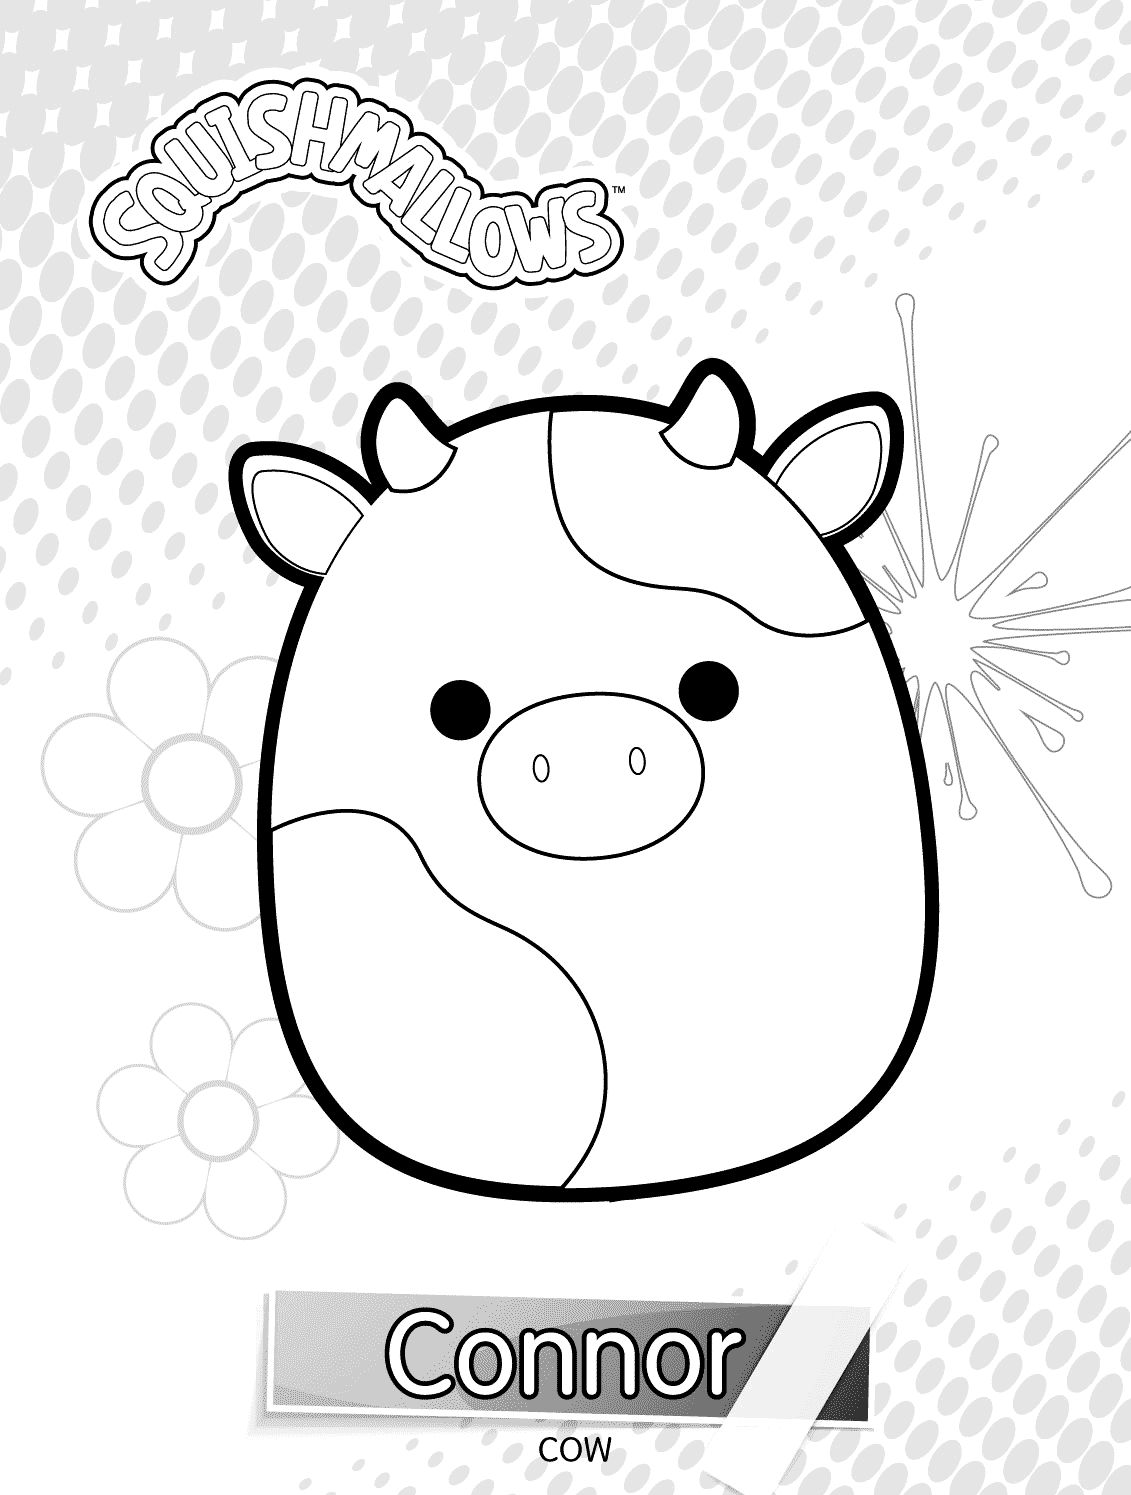 Connor Cow Squishmallows Coloring Page